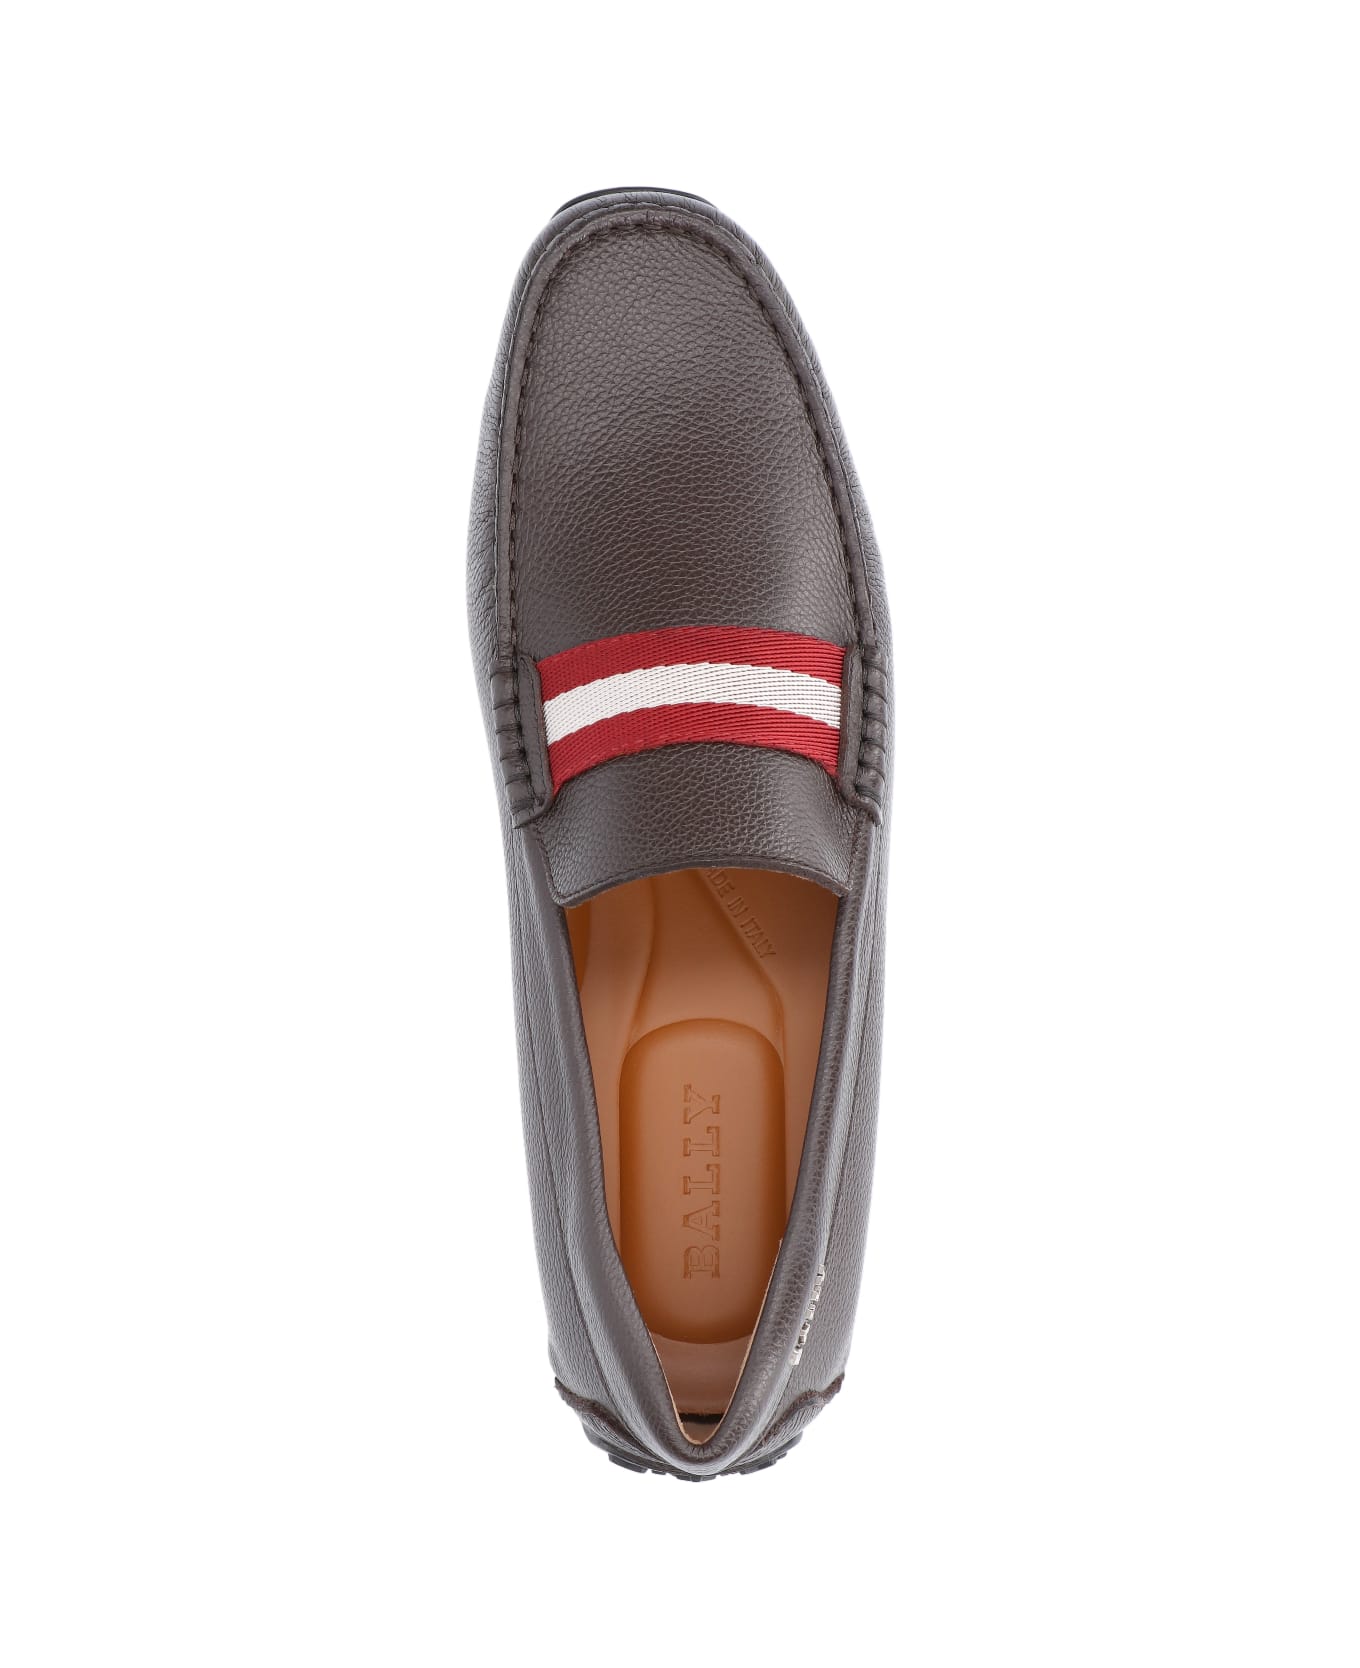 Bally Loafers "pearce" - Brown ローファー＆デッキシューズ